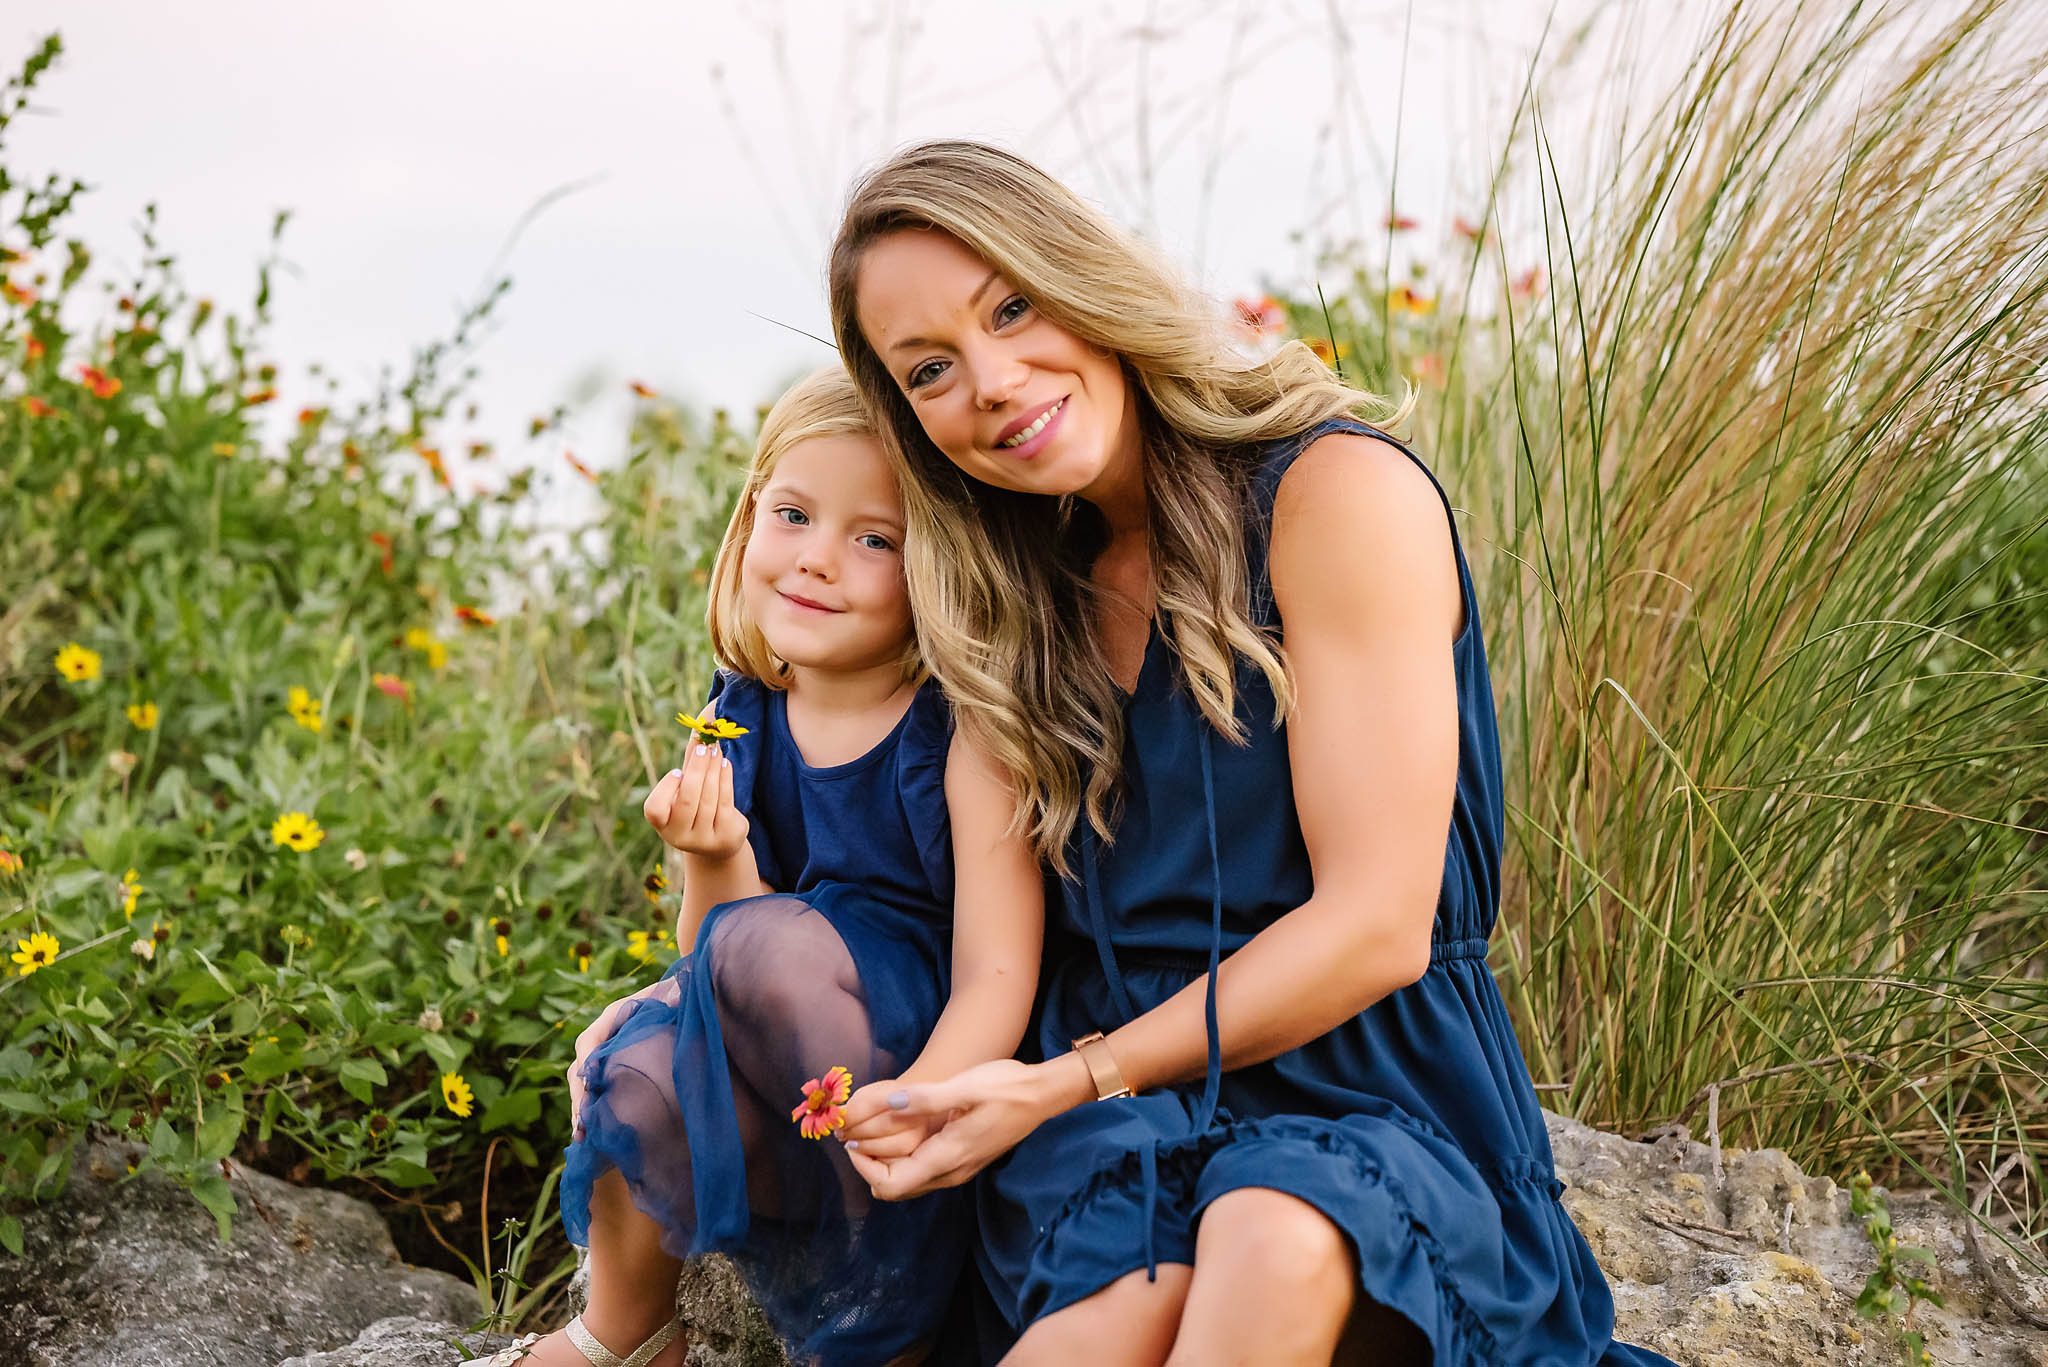 Sweet mom and her little one hold a flower while sitting on a rock in tall grass